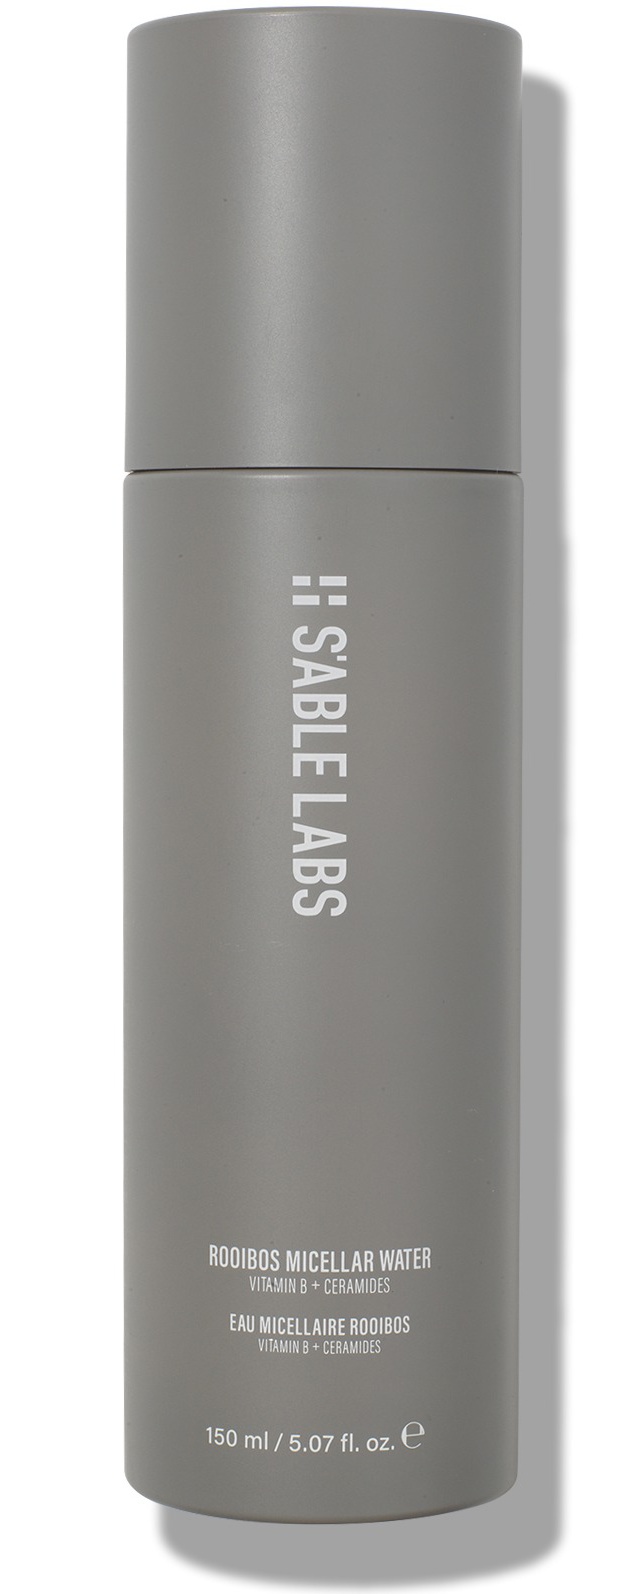 S’Able Labs Rooibos Micellar Water